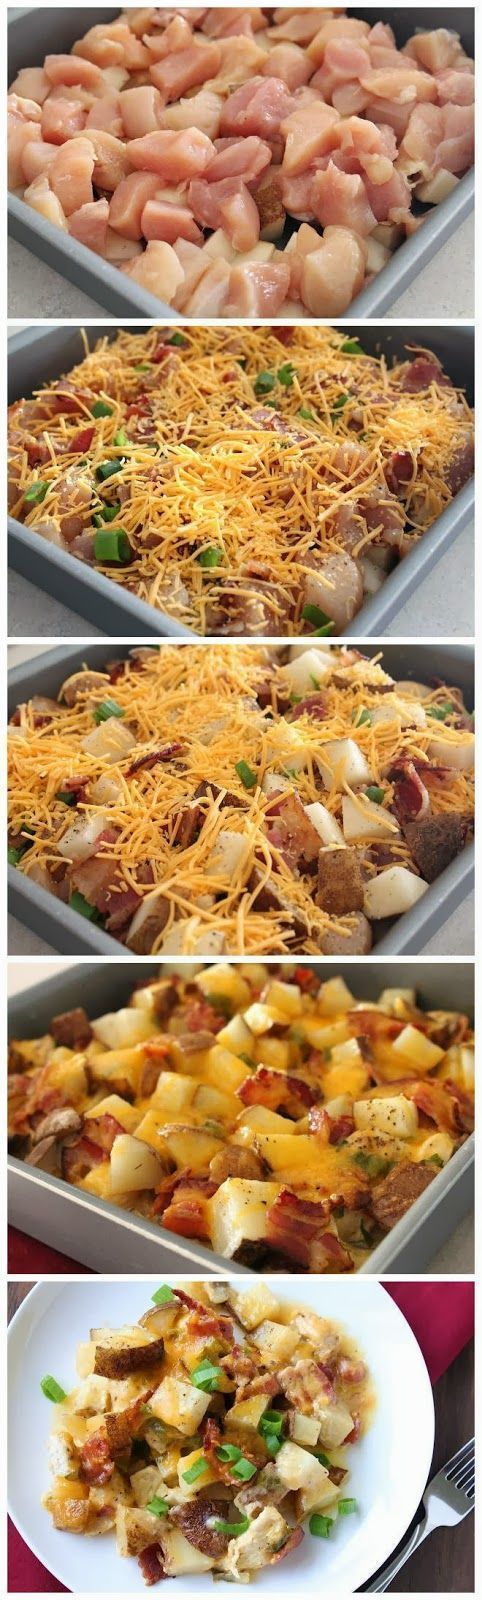 Loaded Baked Potato and Chicken Casserole.. This needs to be lightened up a bit but looks like something I need to test for